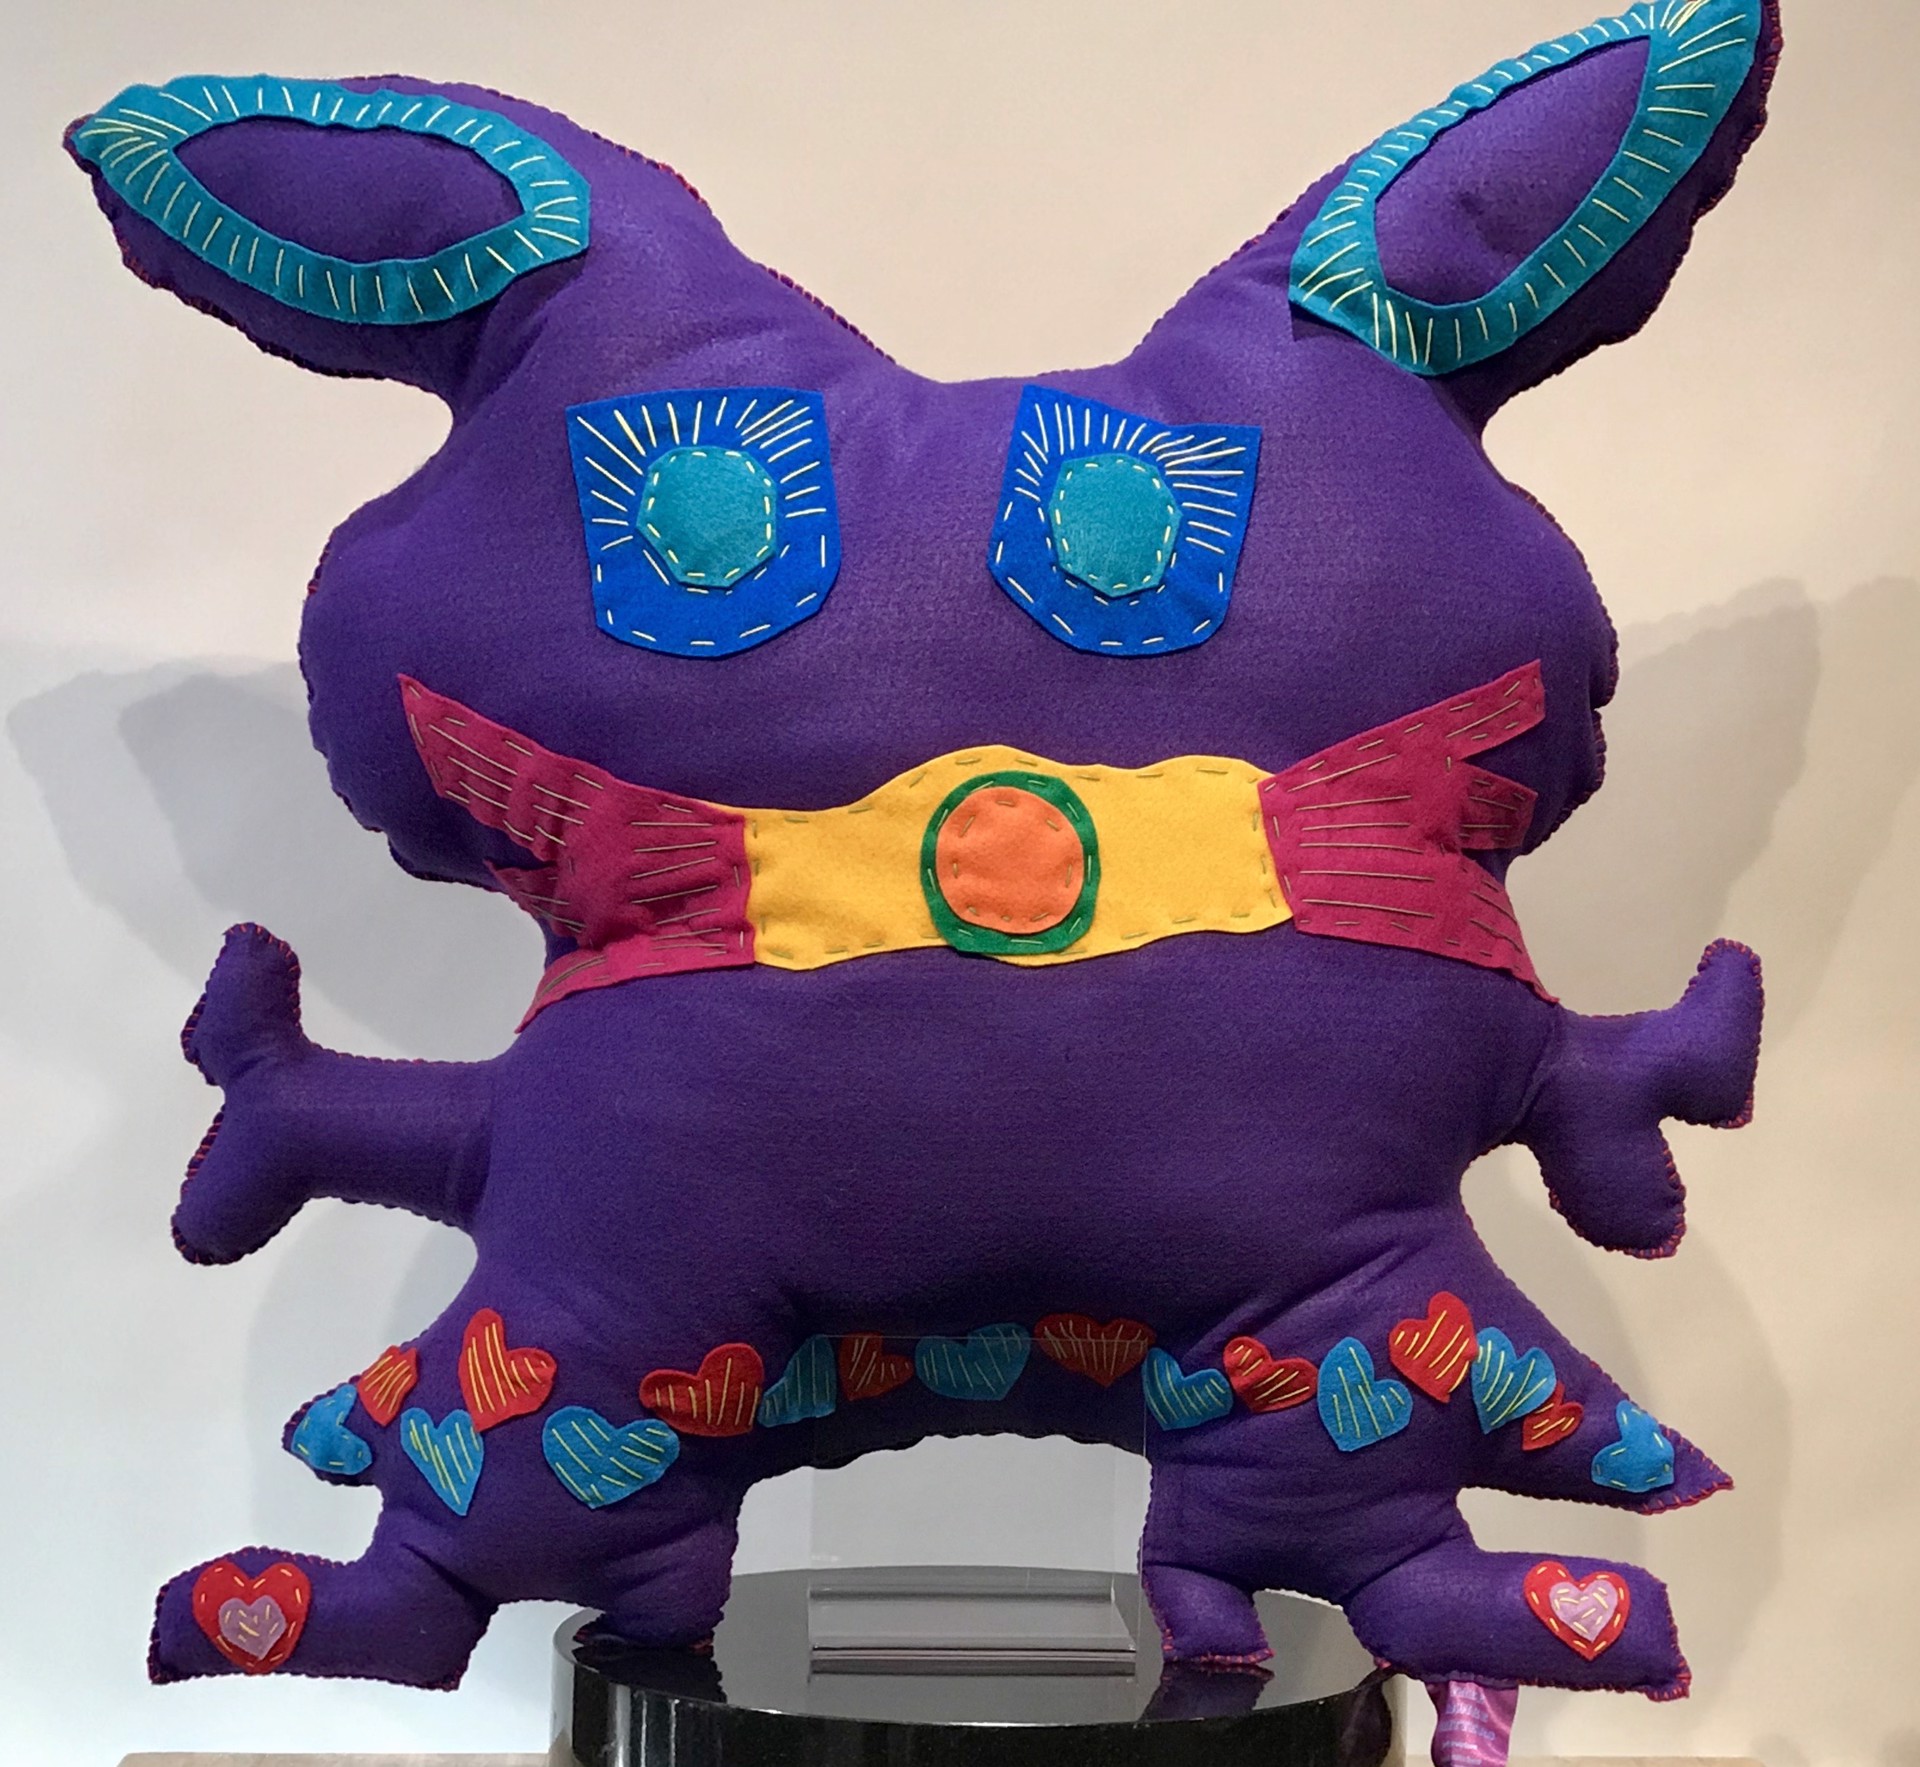 Great Big Free Range Critter Purple & Pink with Boots by Kerry Green